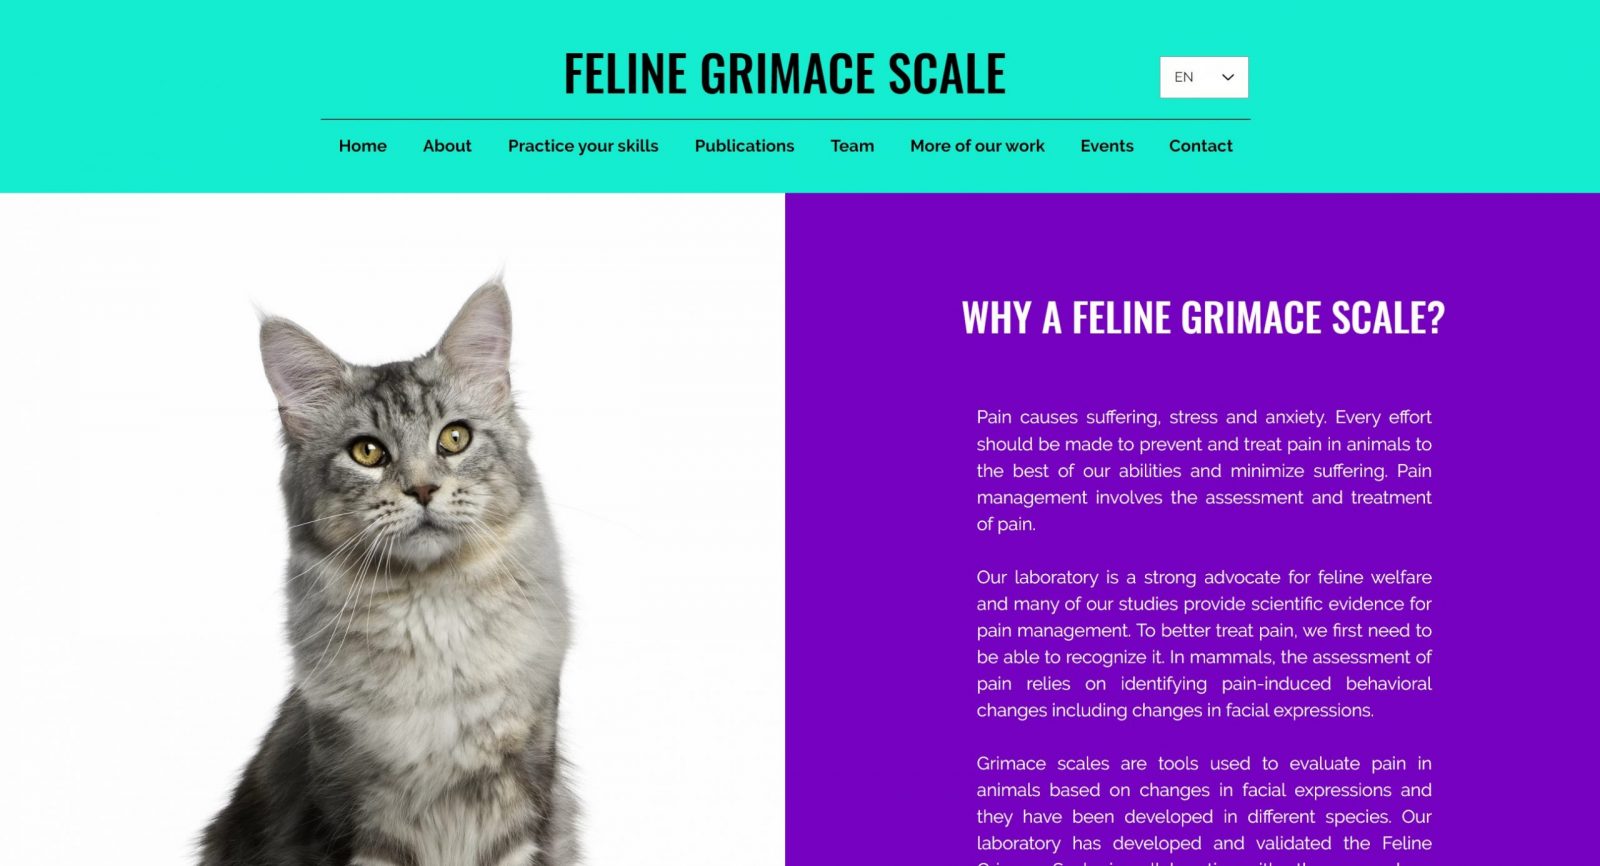 Meow, it hurts! Can owners recognize acute pain in cats using the Feline Grimace Scale?